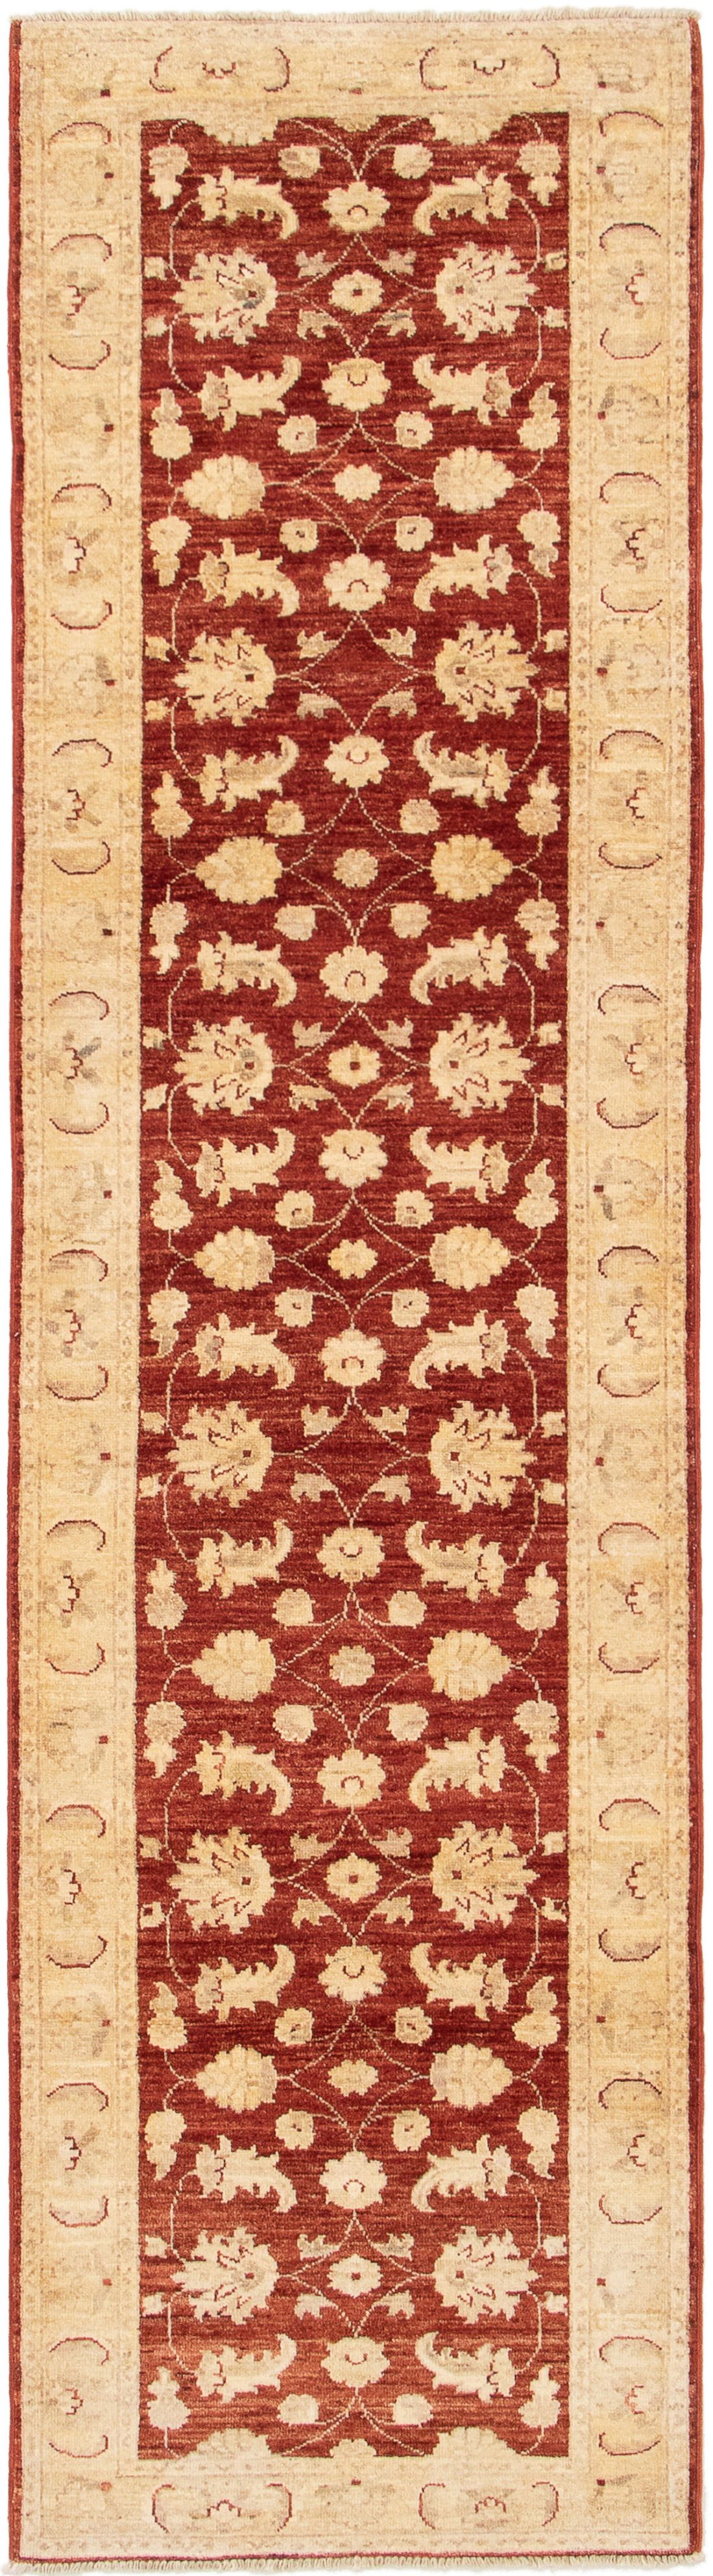 Hand-knotted Chobi Finest Dark Red Wool Rug 2'7" x 10'2" Size: 2'7" x 10'2"  